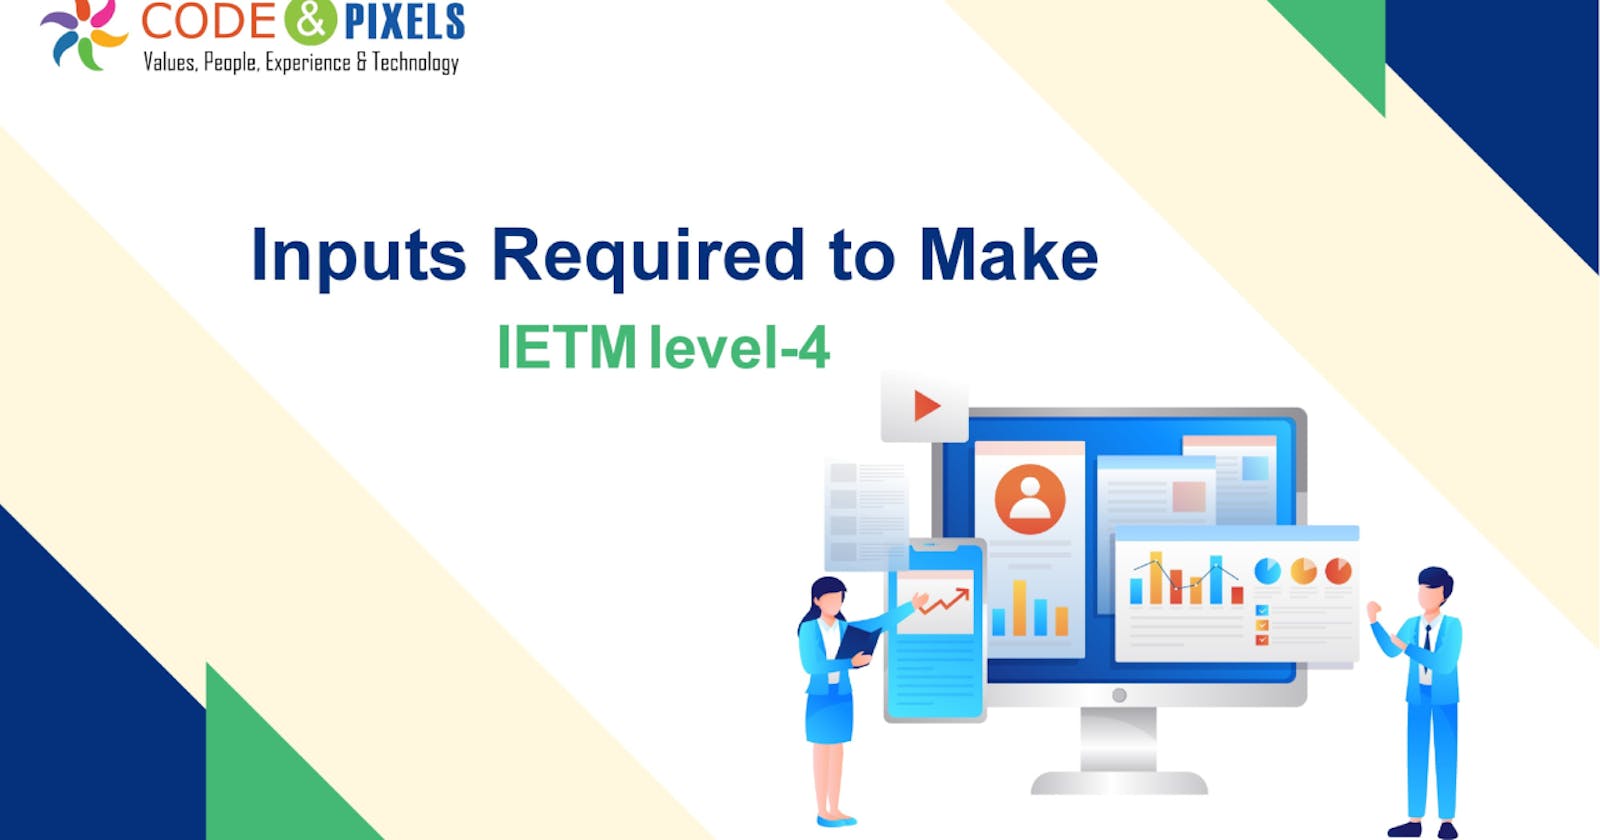 Documents Required to Make IETM Level 4 Software Code and Pixels